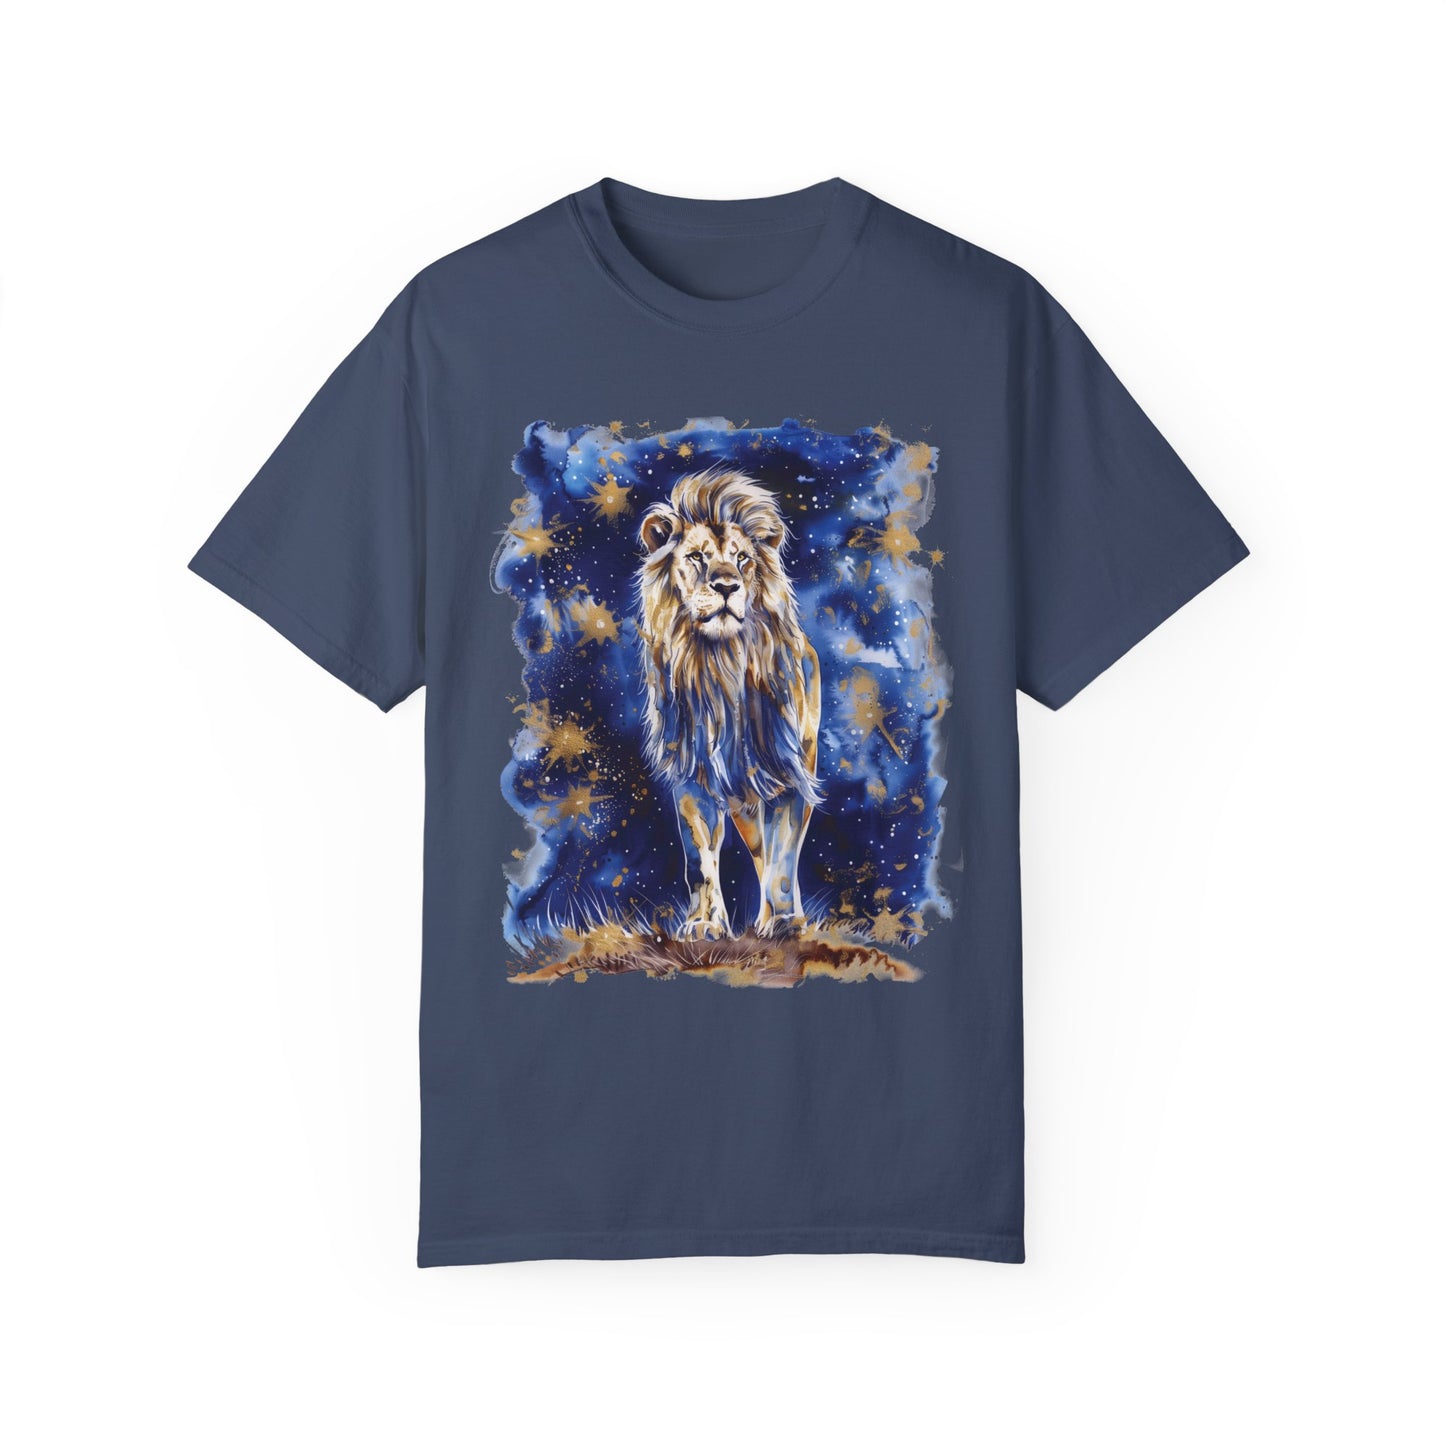 Leo Zodiac Shirt, Leo Constellation Shirt, Comfort Colors Shirt, Leo Sign Shirt, August Birthday Gift, Lion Tee, Gift for her, Gift for him